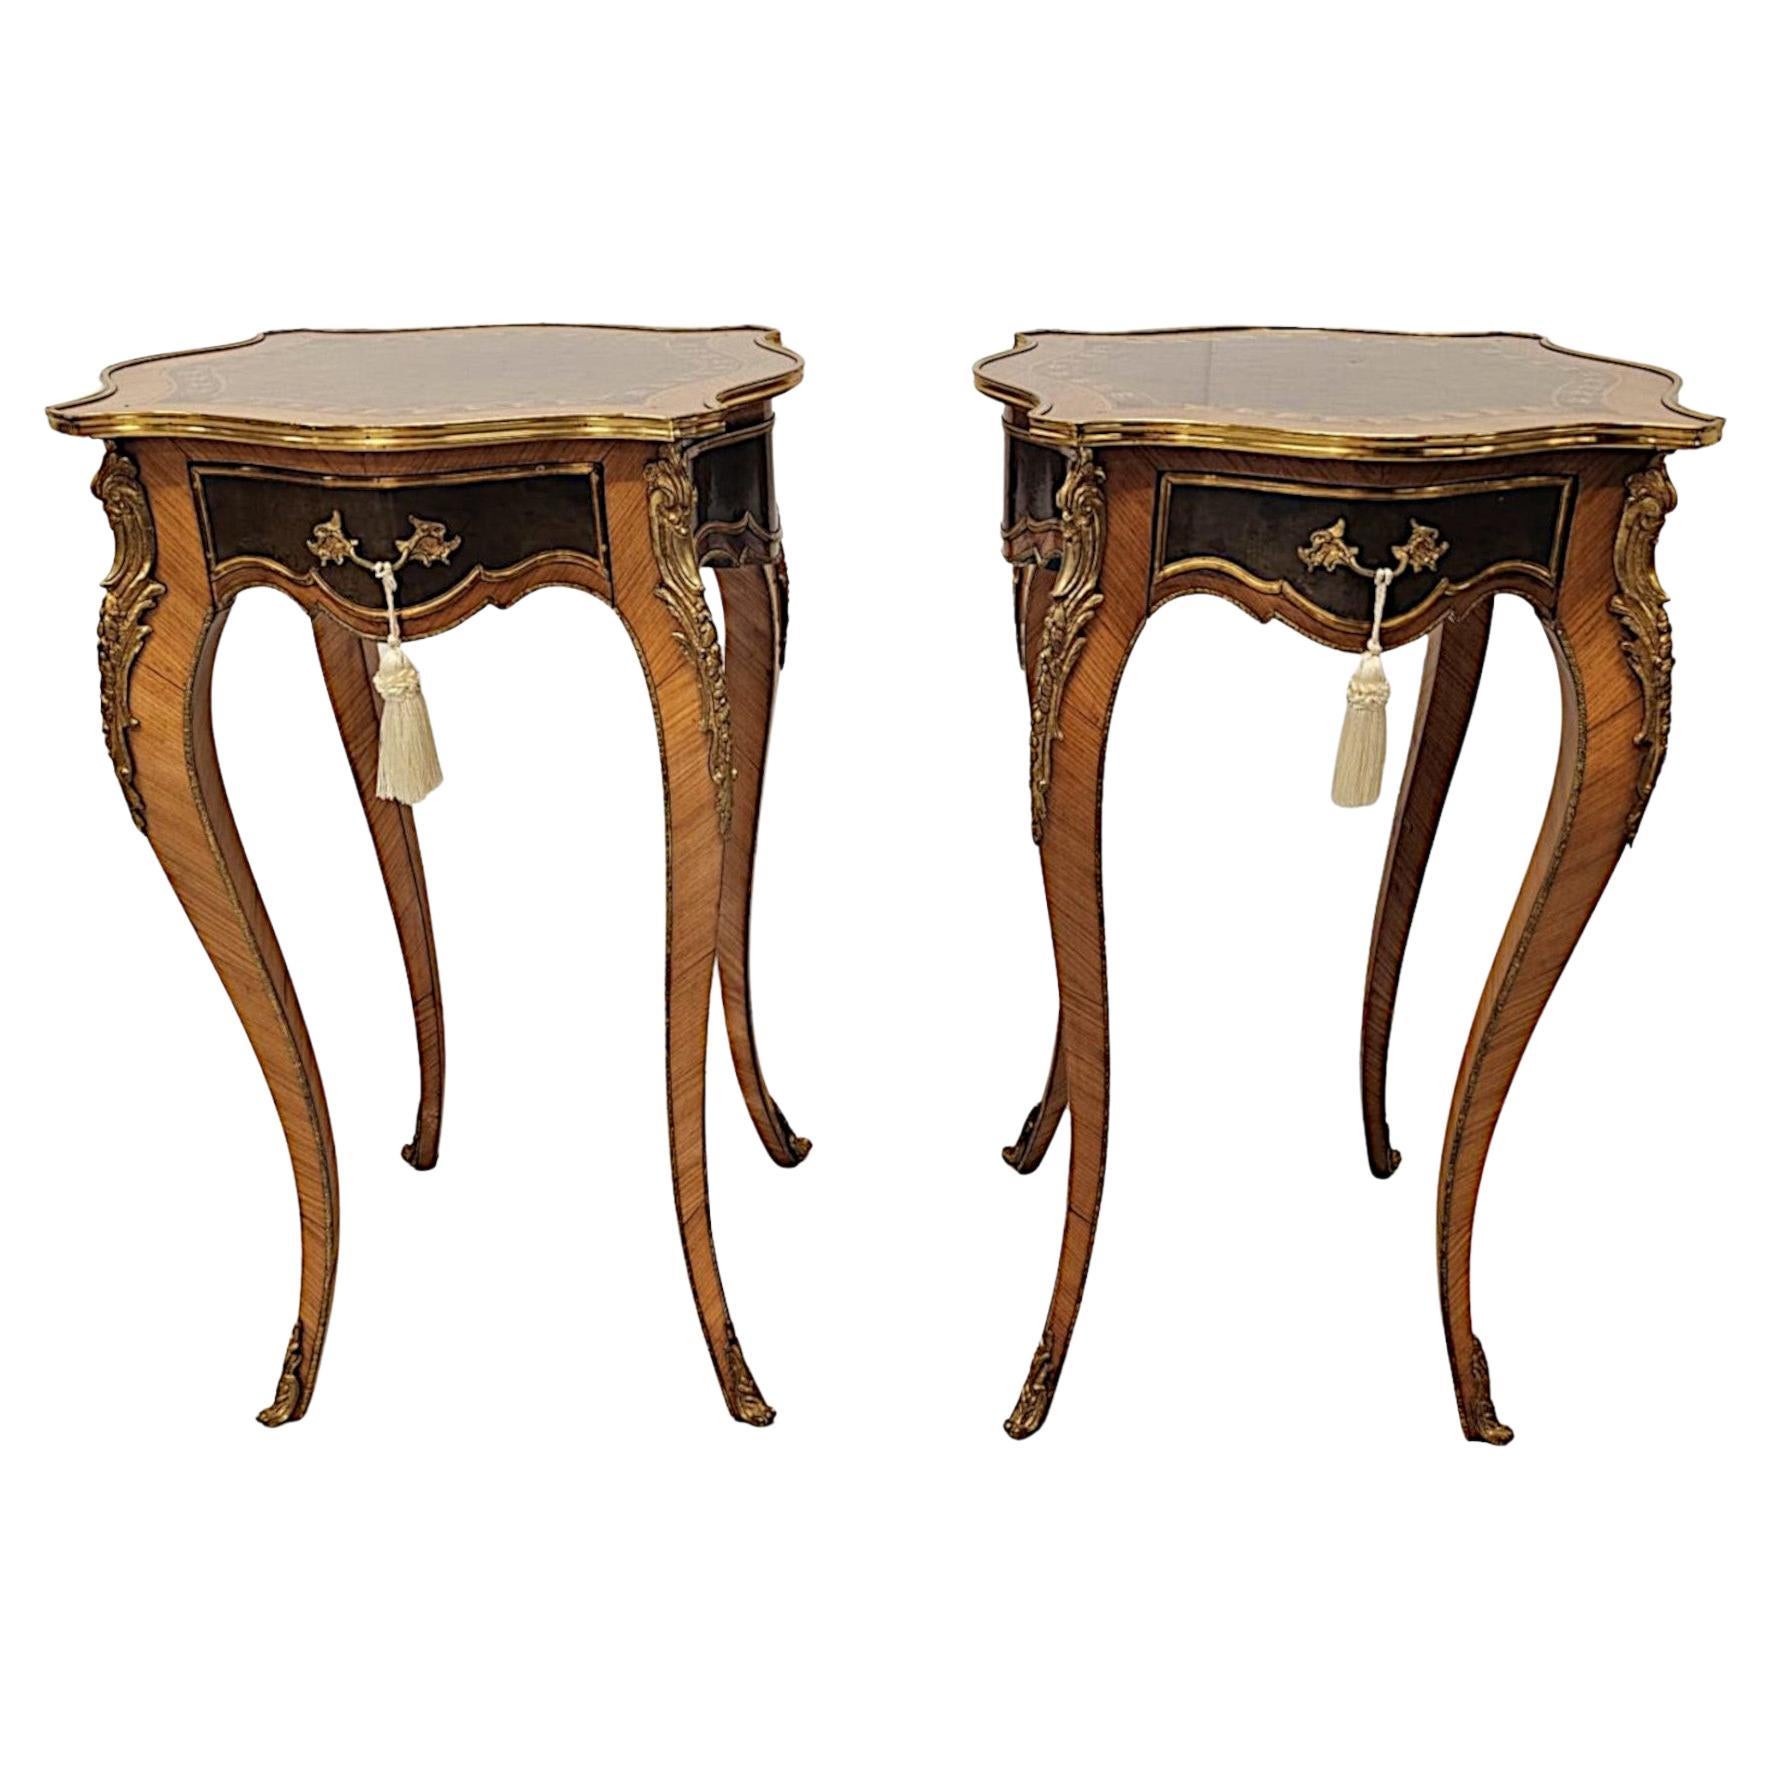 A Stunning Pair of 20th Century Ormolu Mounted Inlaid Side Tables For Sale